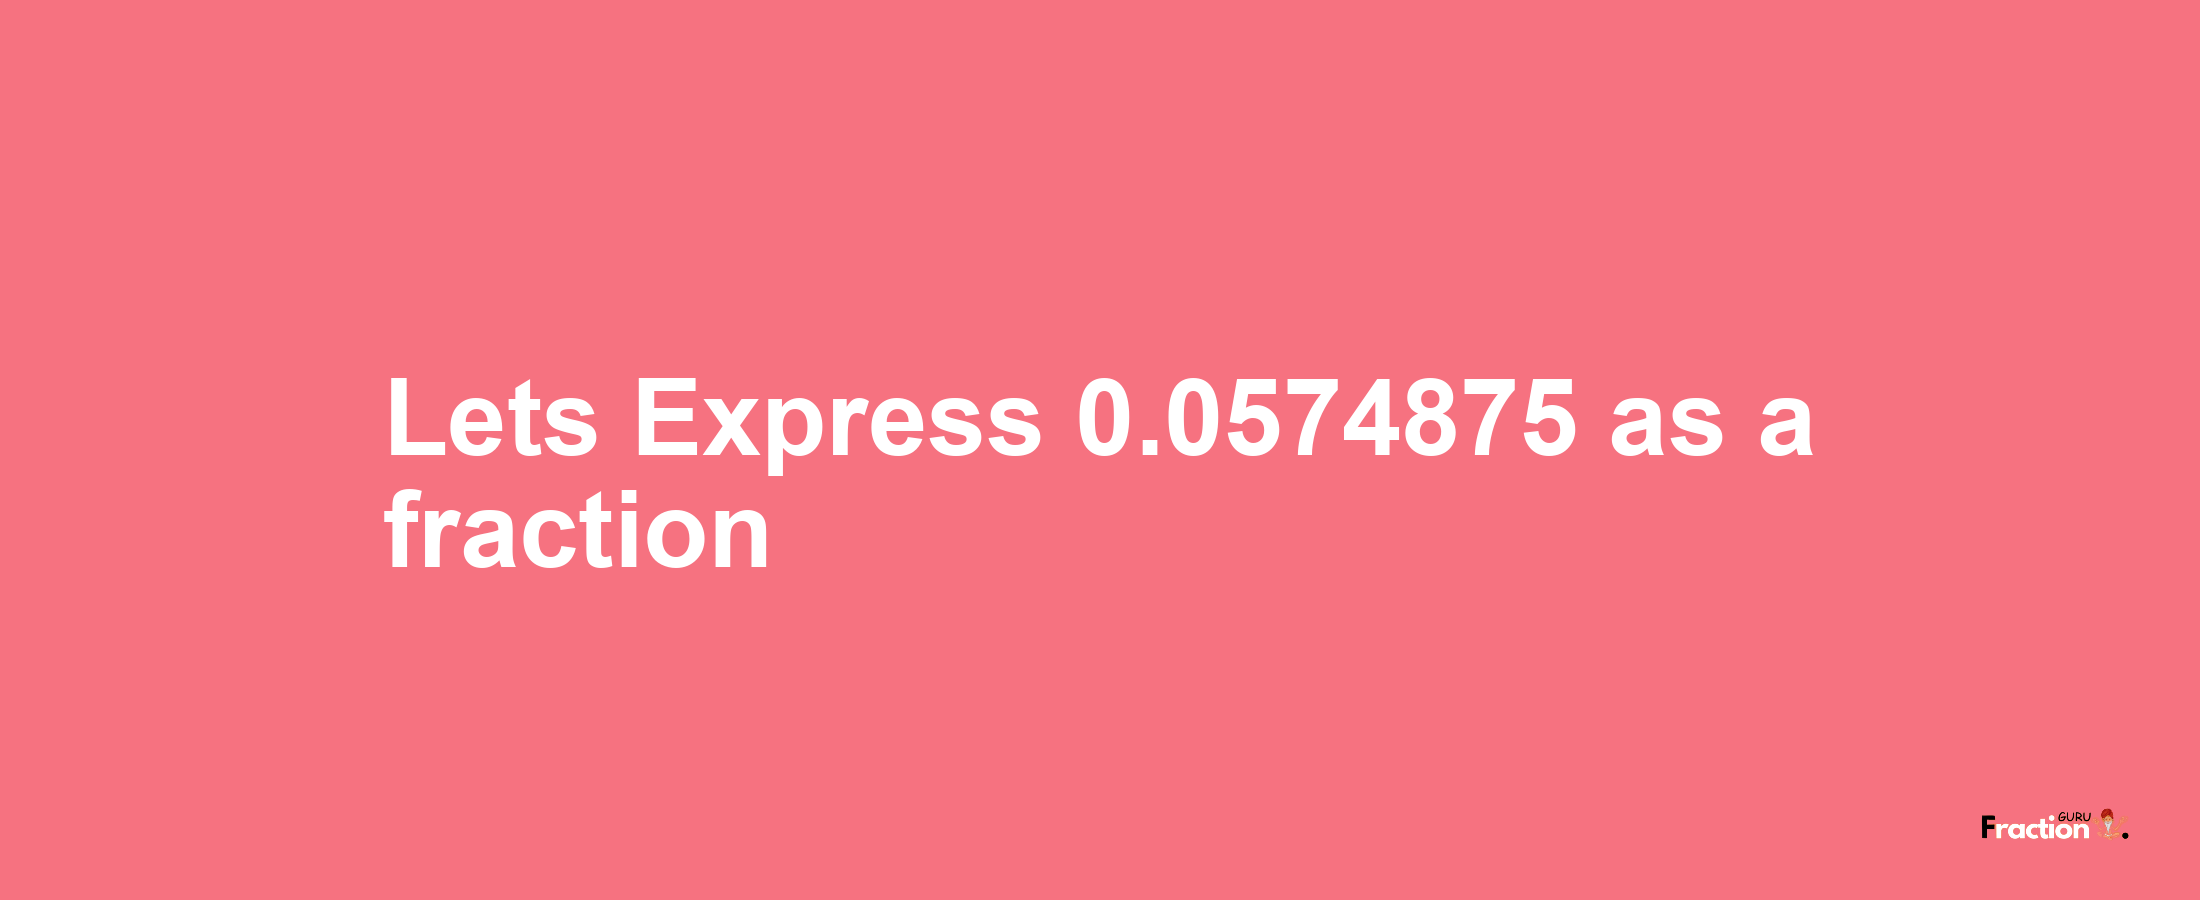 Lets Express 0.0574875 as afraction